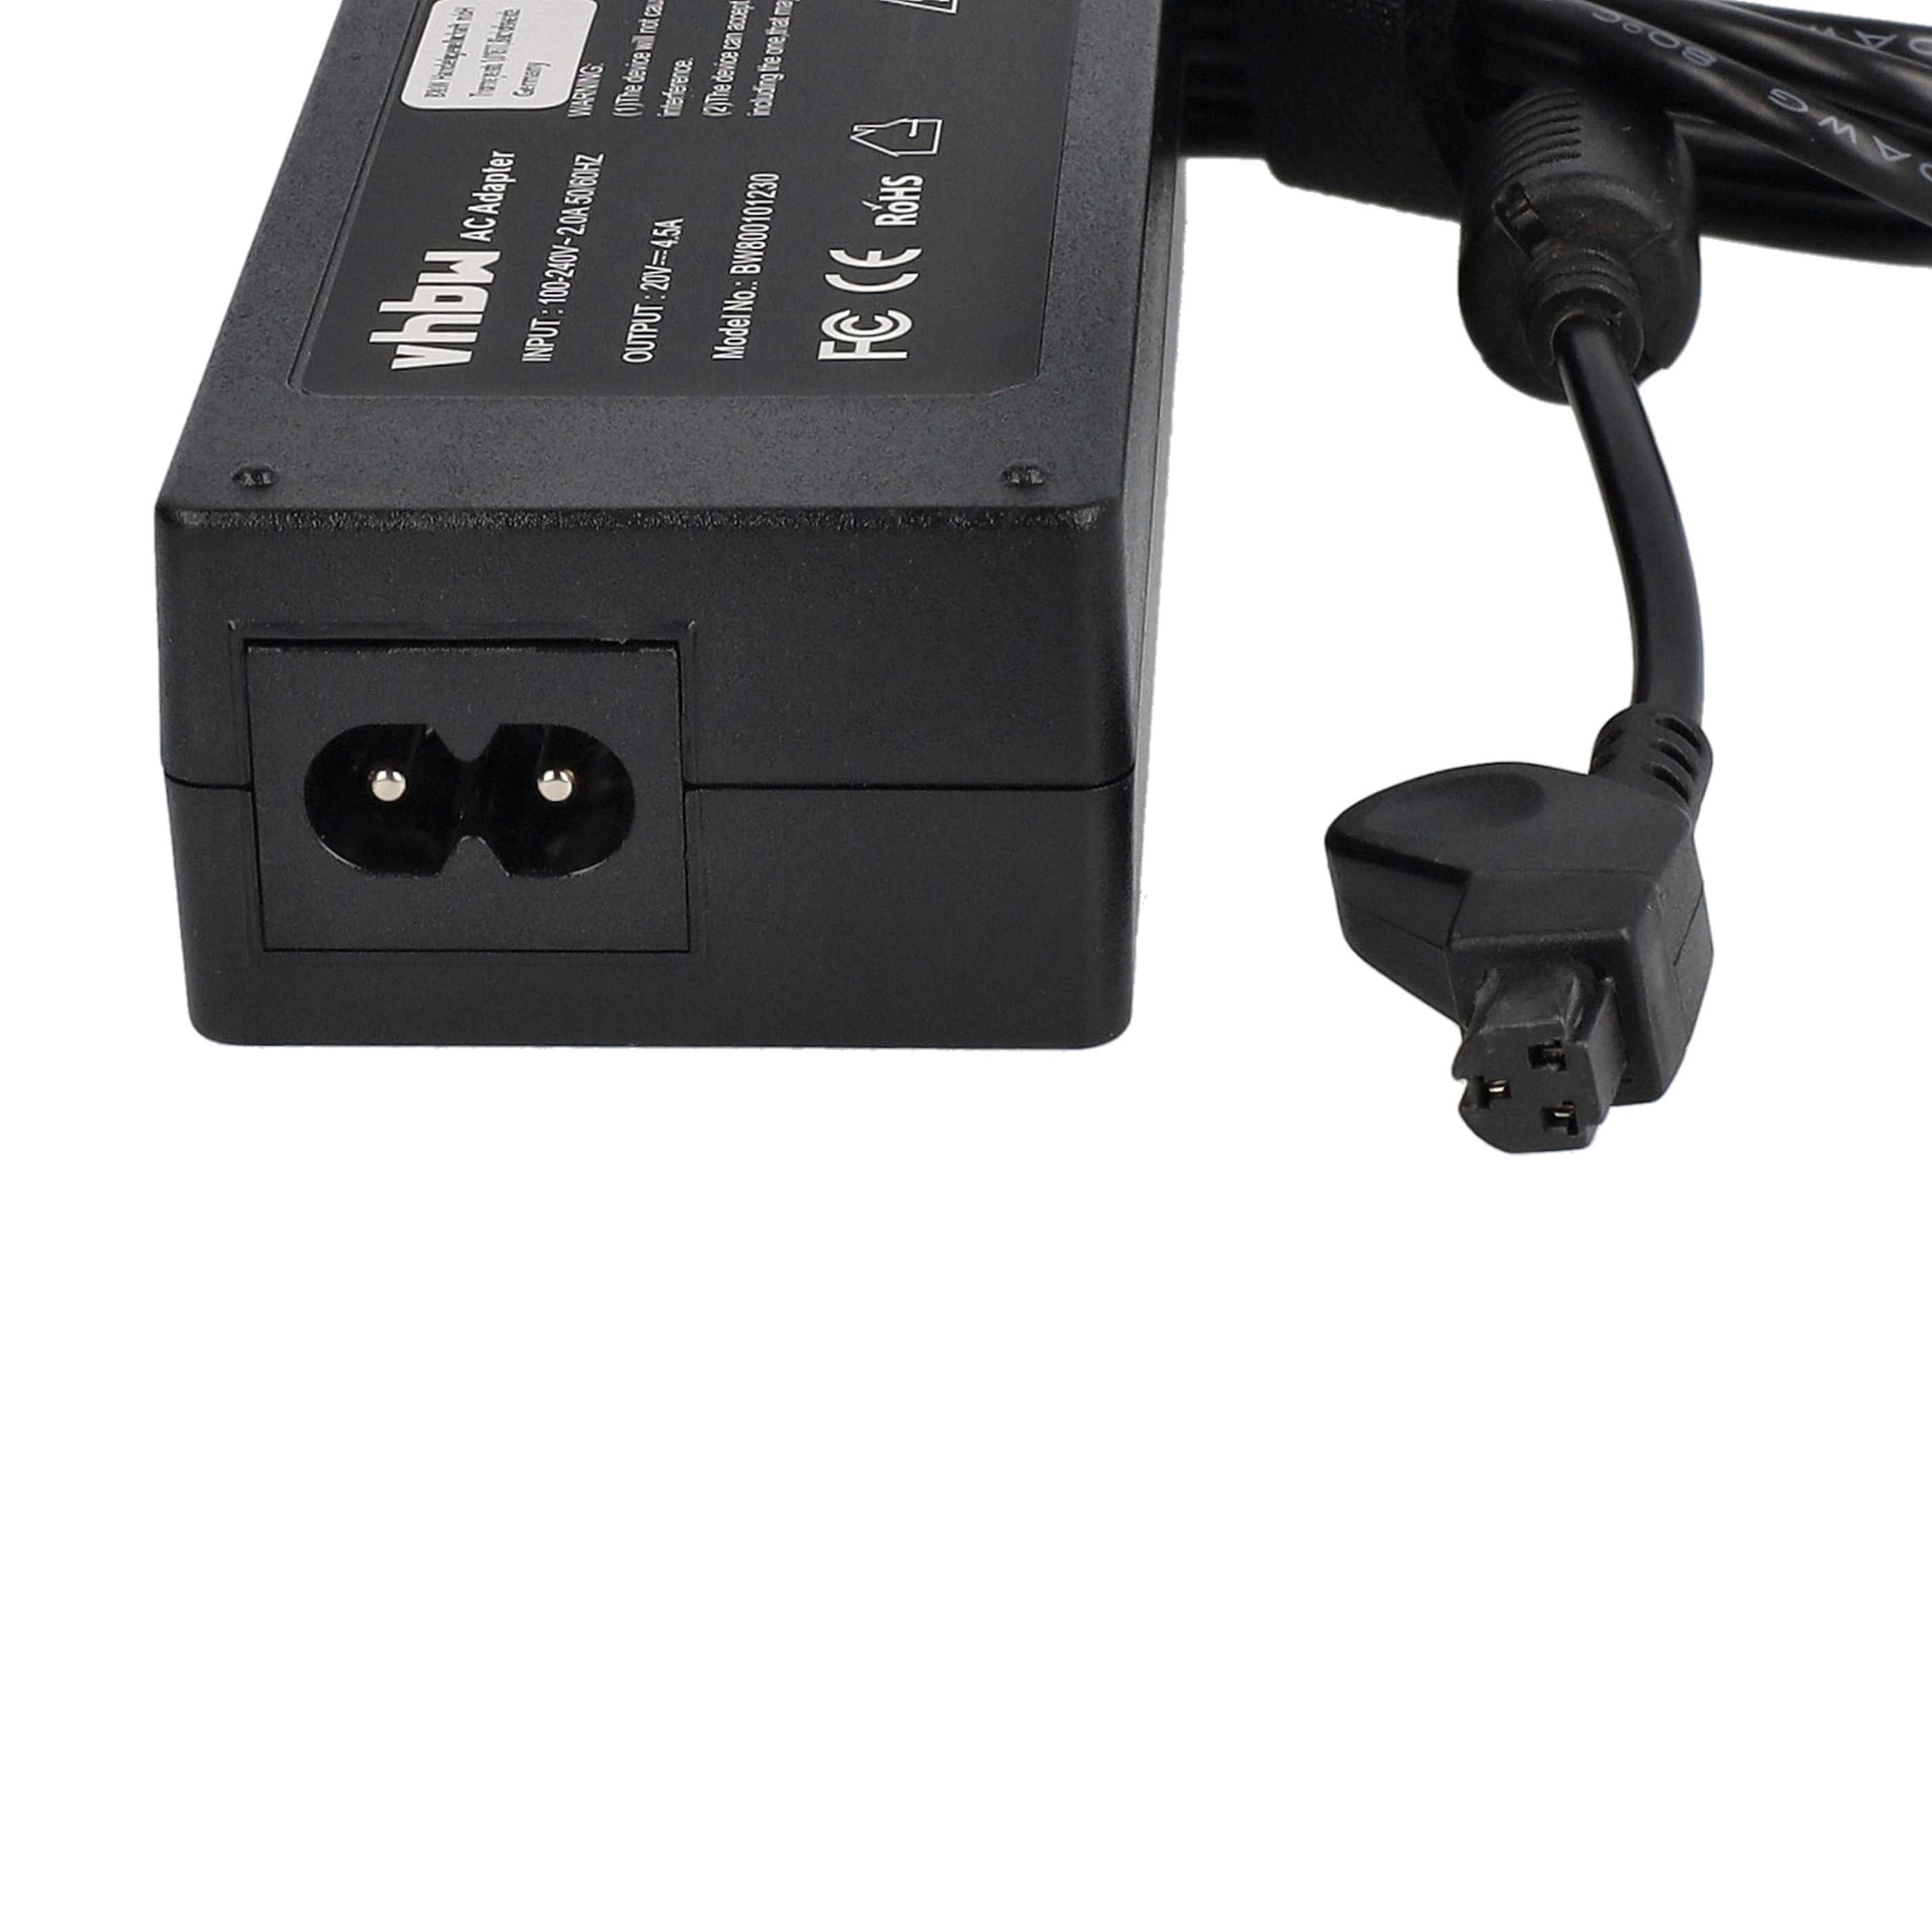 Mains Power Adapter replaces Dell 1Y004, 310-1650, 310-1093, 310-4615, 310-2993 for DellNotebook, 90 W